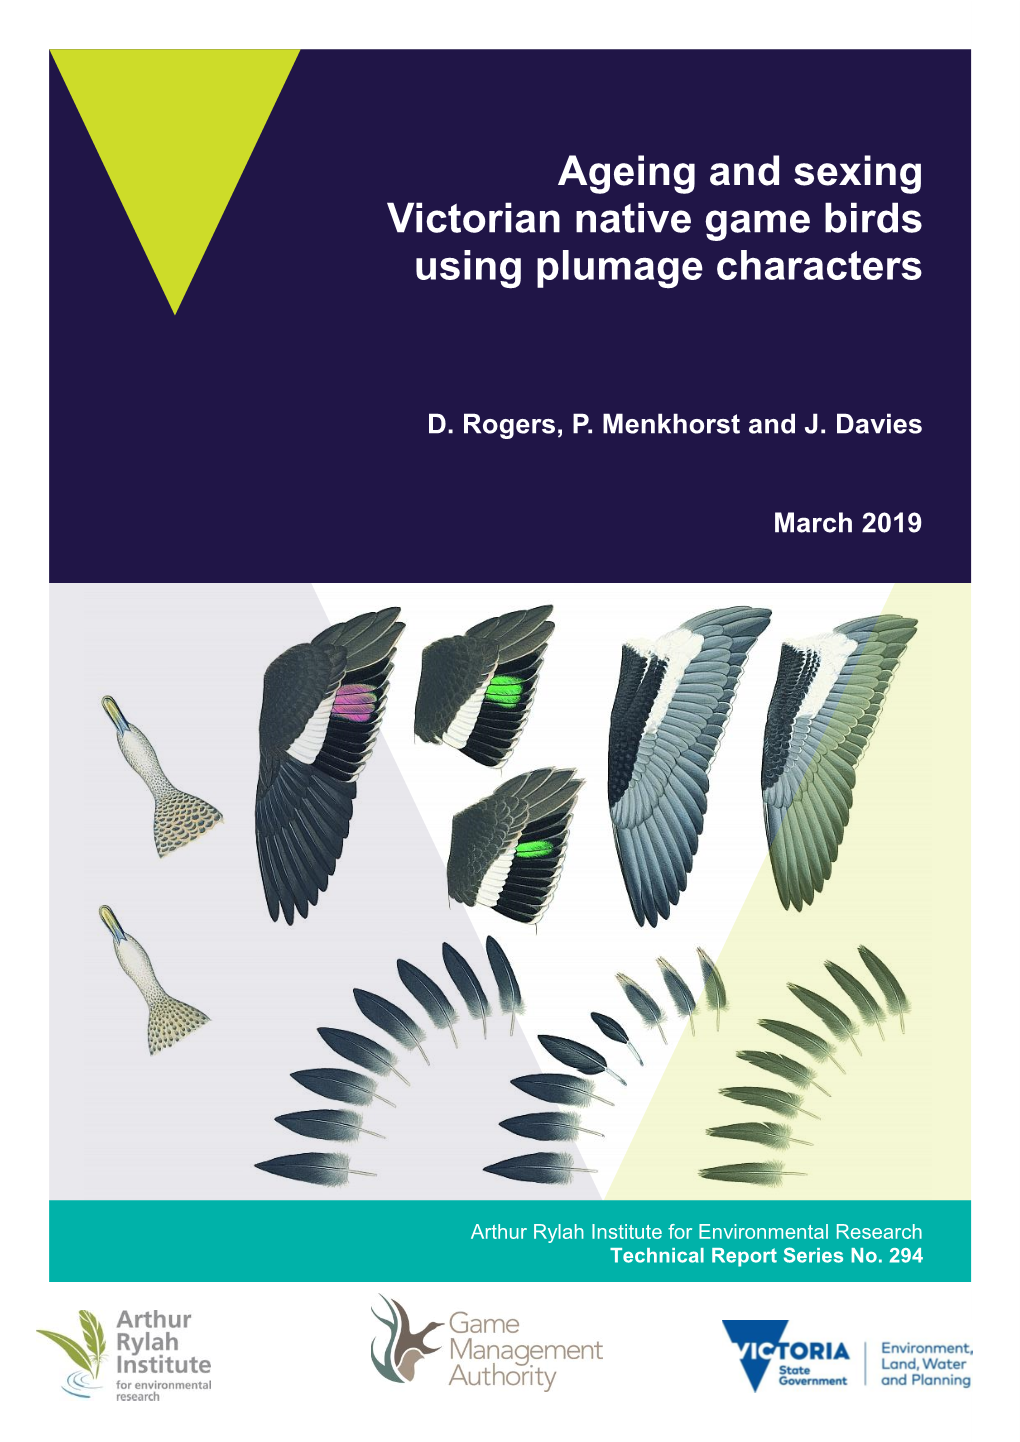 Ageing and Sexing Victorian Native Game Birds Using Plumage Characters